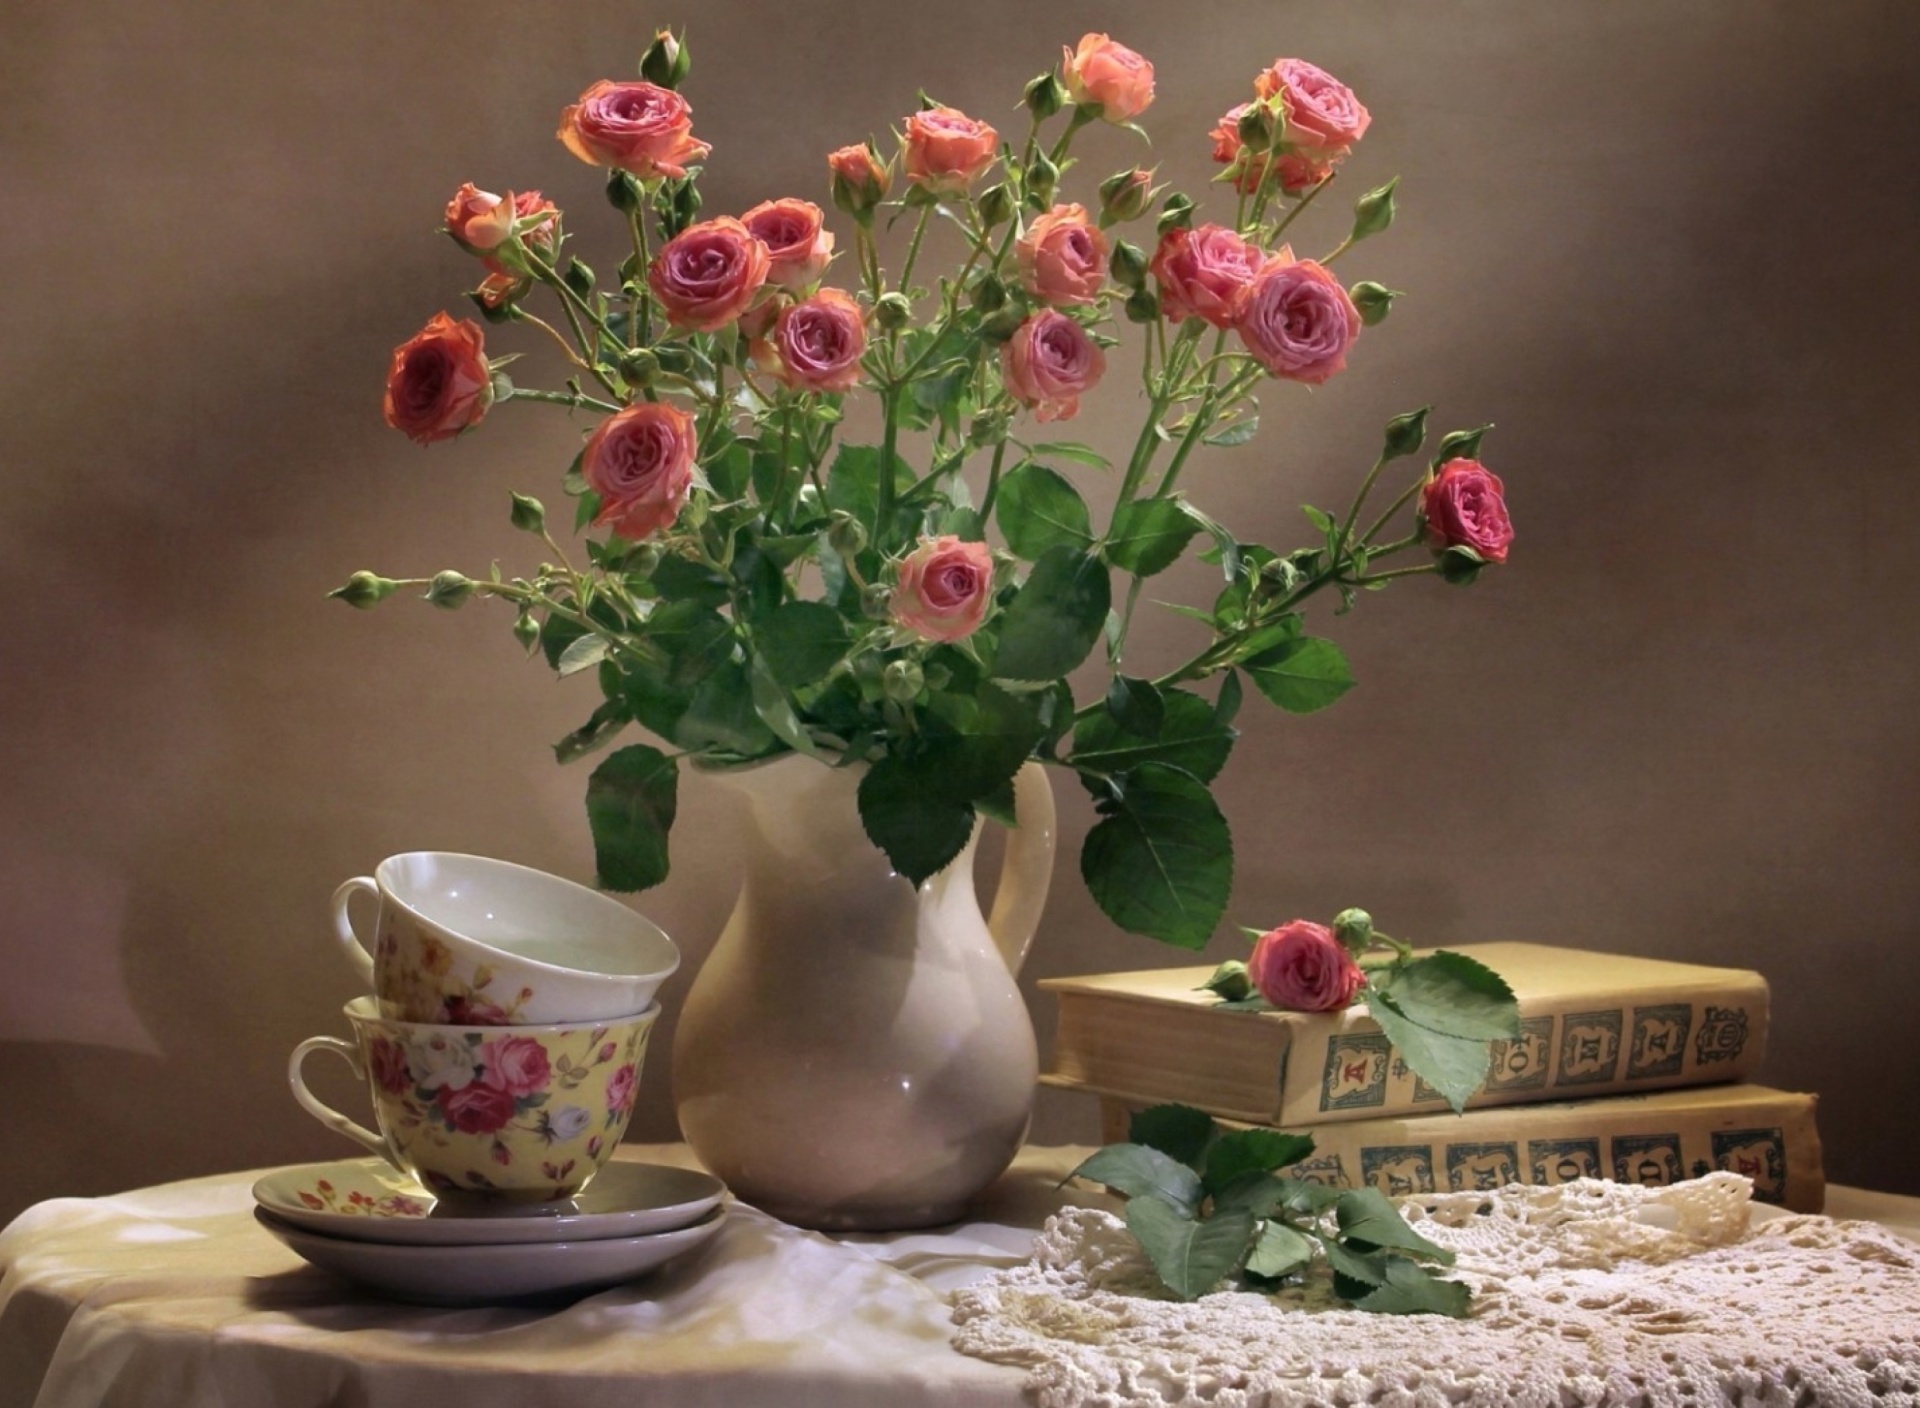 Still life of vintage books and roses screenshot #1 1920x1408